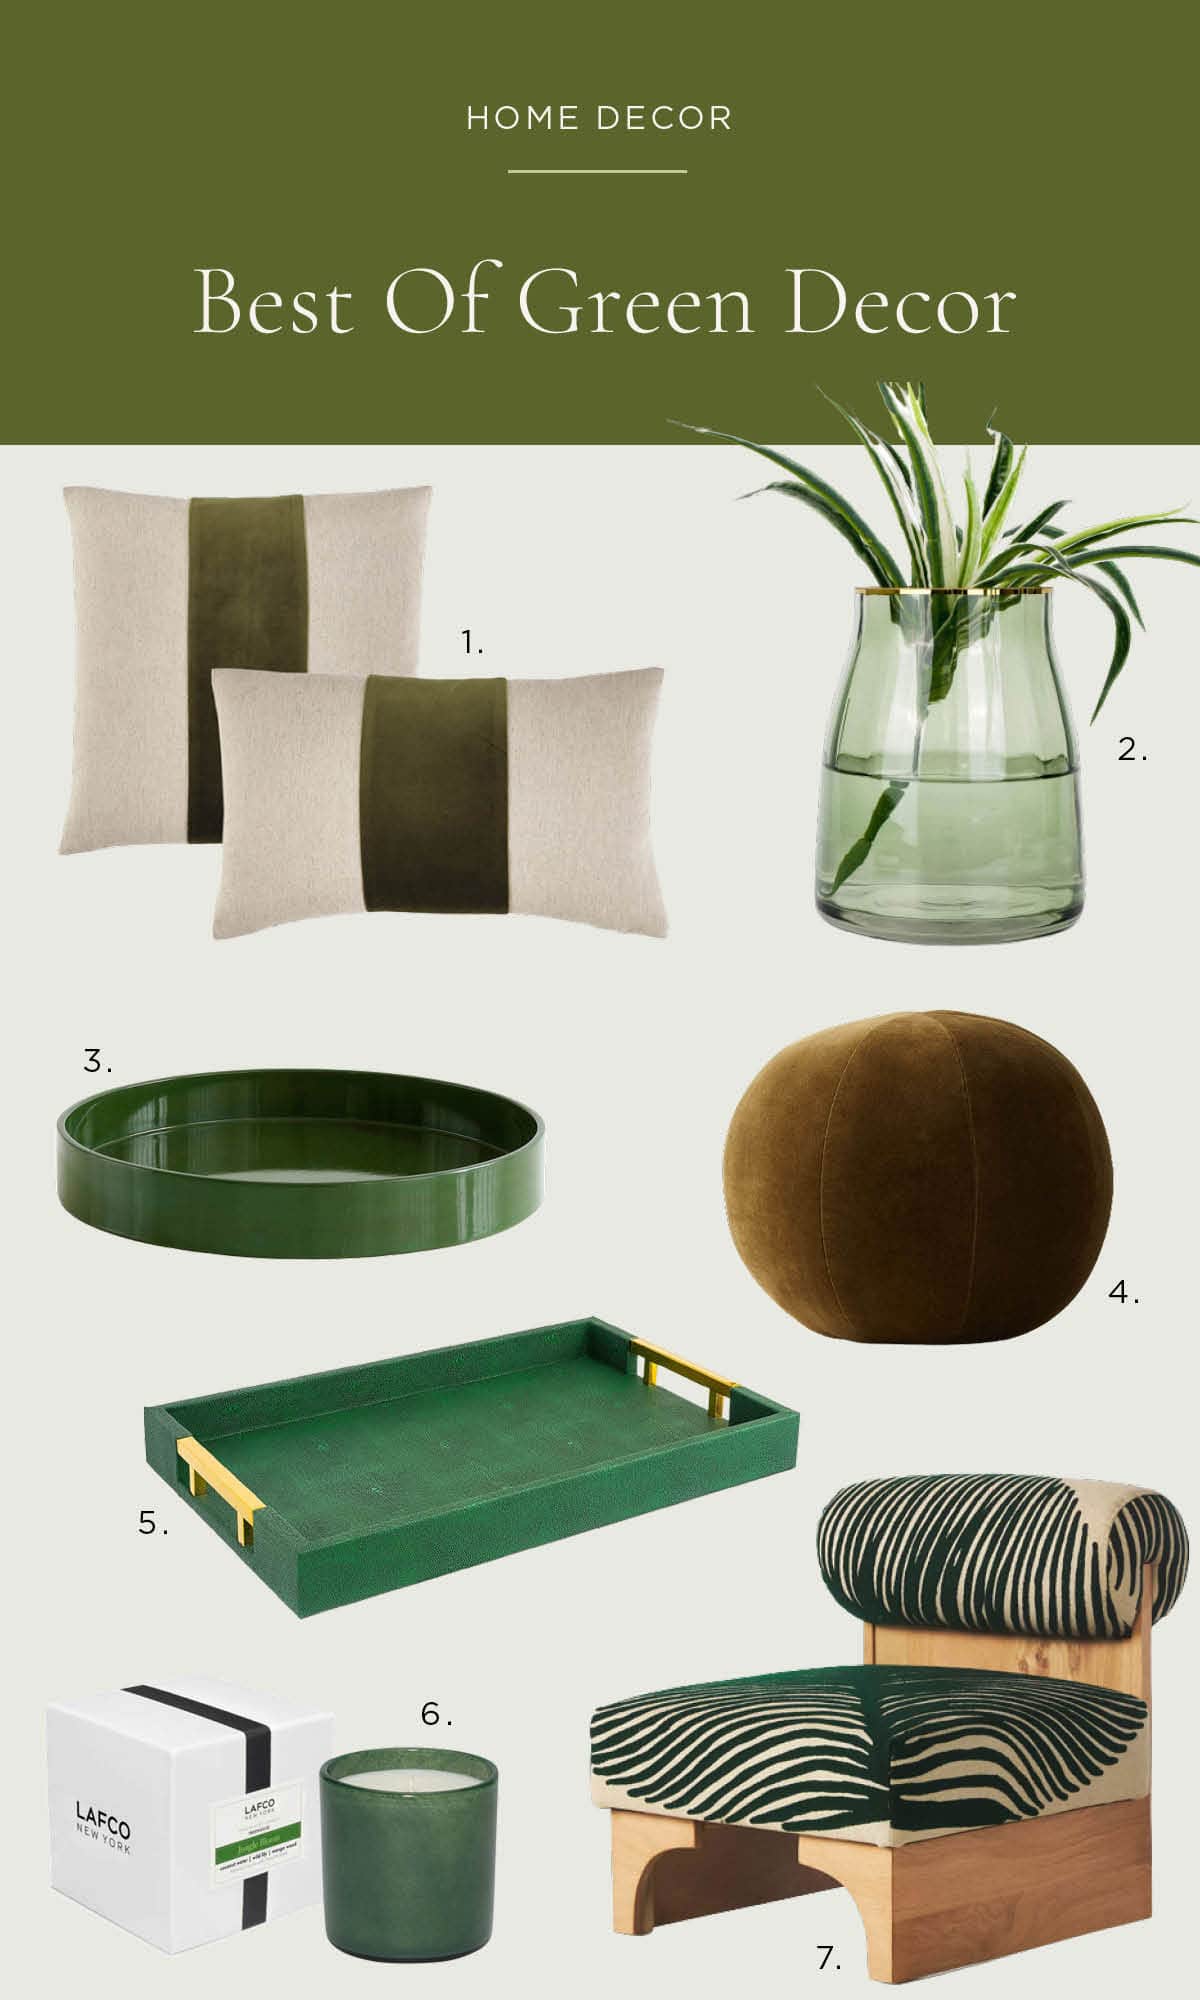 Green Decor - Decorating Ideas For Your Home For Spring 